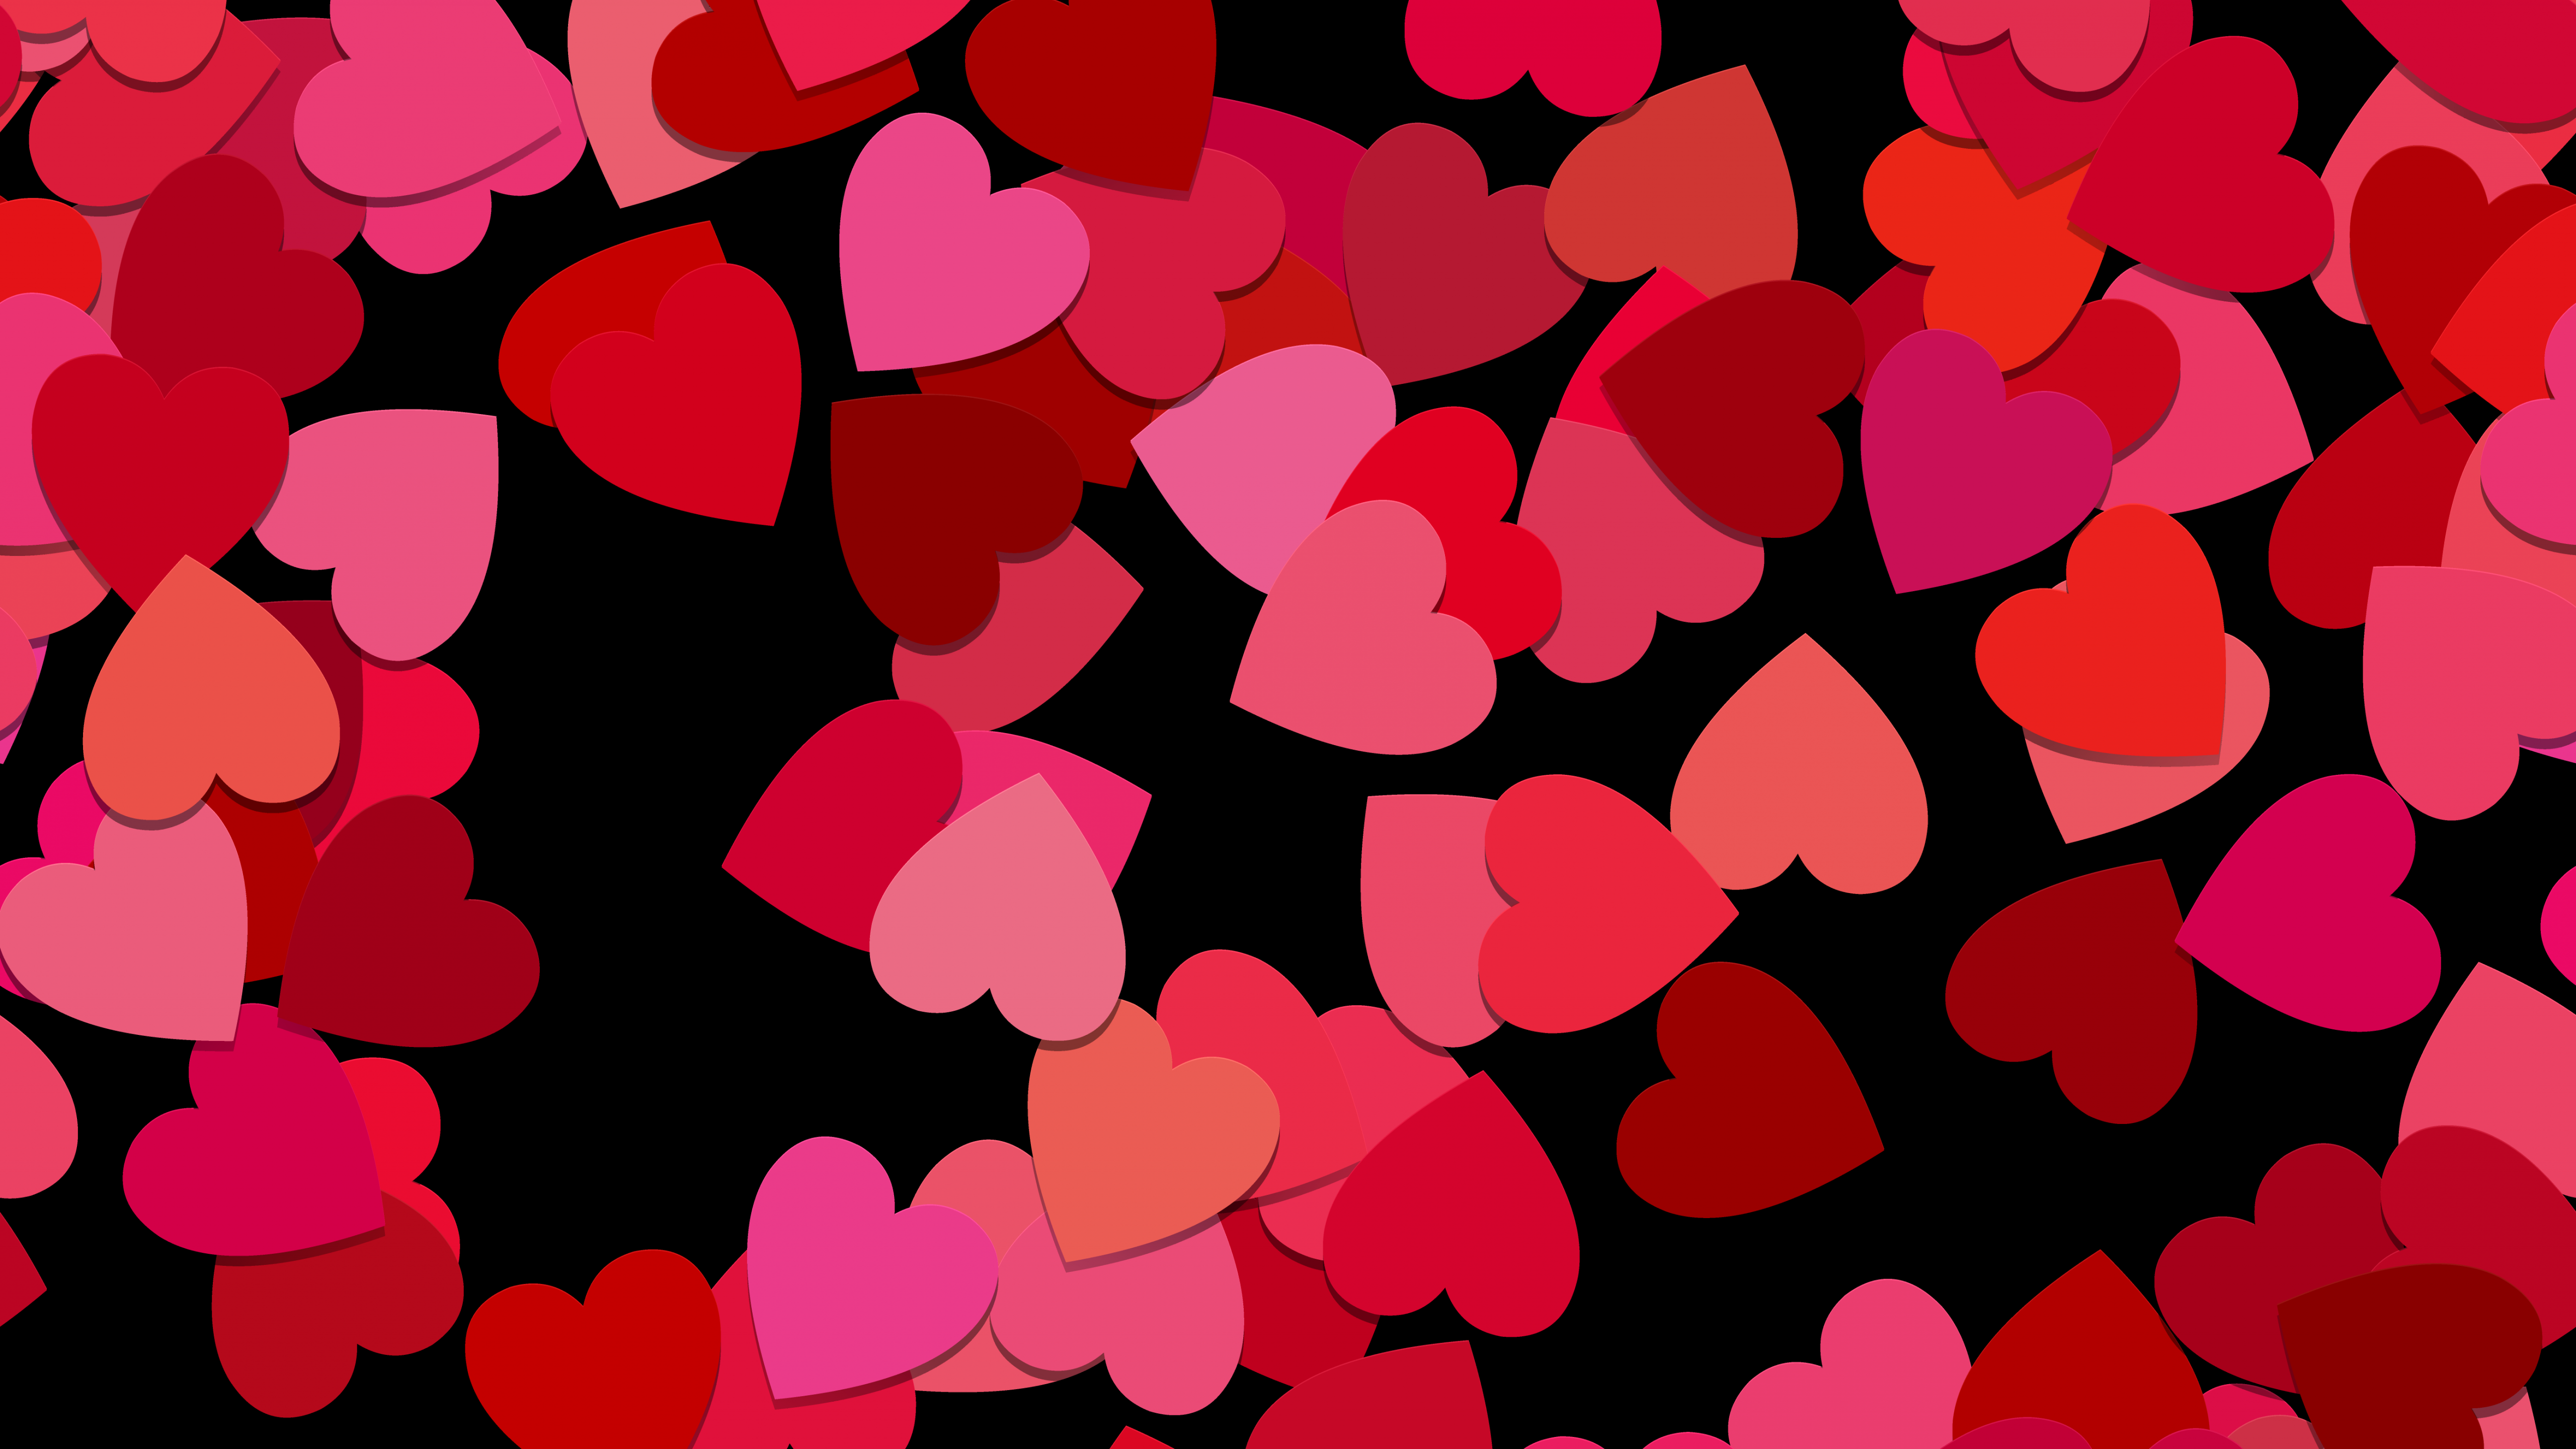 Love hearts Wallpaper 4K, Red hearts, Girly background, 5K, Love